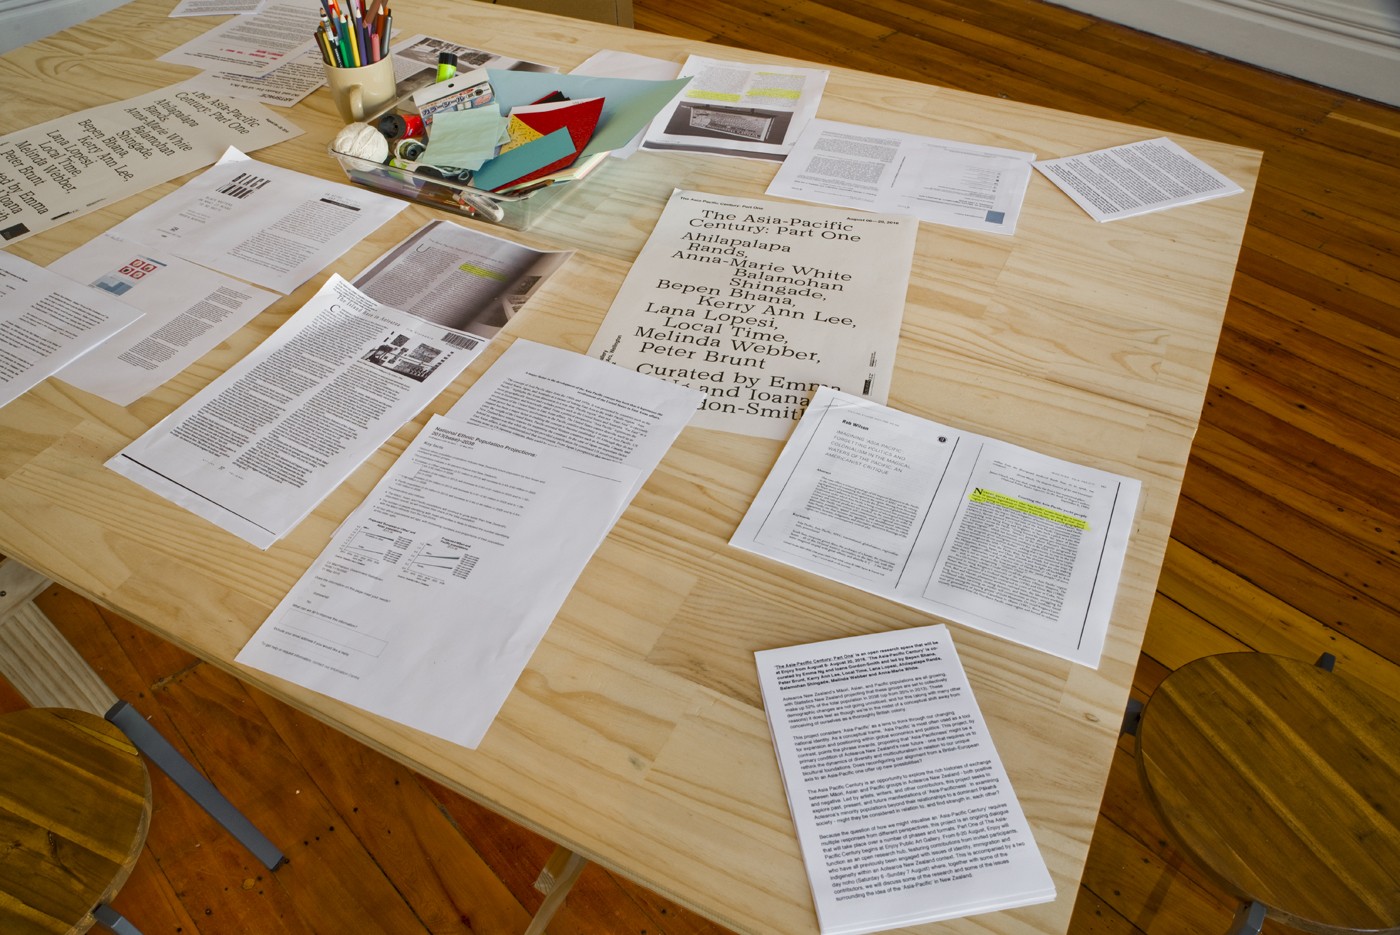 Photocopied articles and other research papers are scattered across a table in an art gallery.